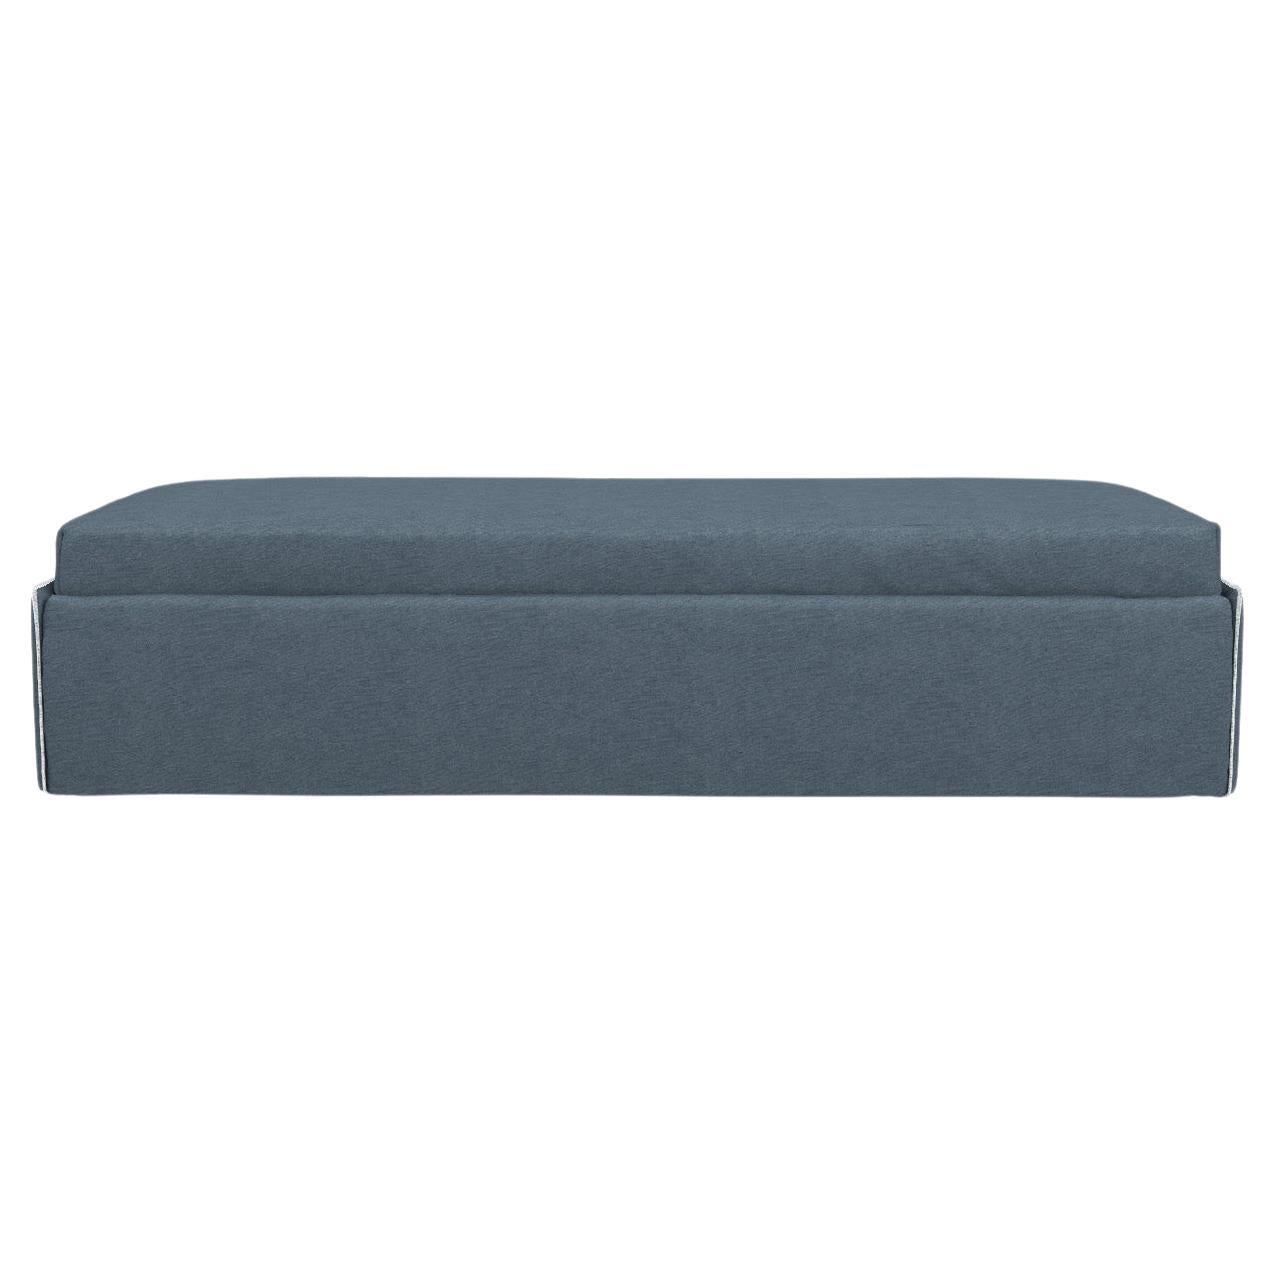 Gervasoni Open 0 Small Modular Bed Sofa in Munch Upholstery by Paola Navone